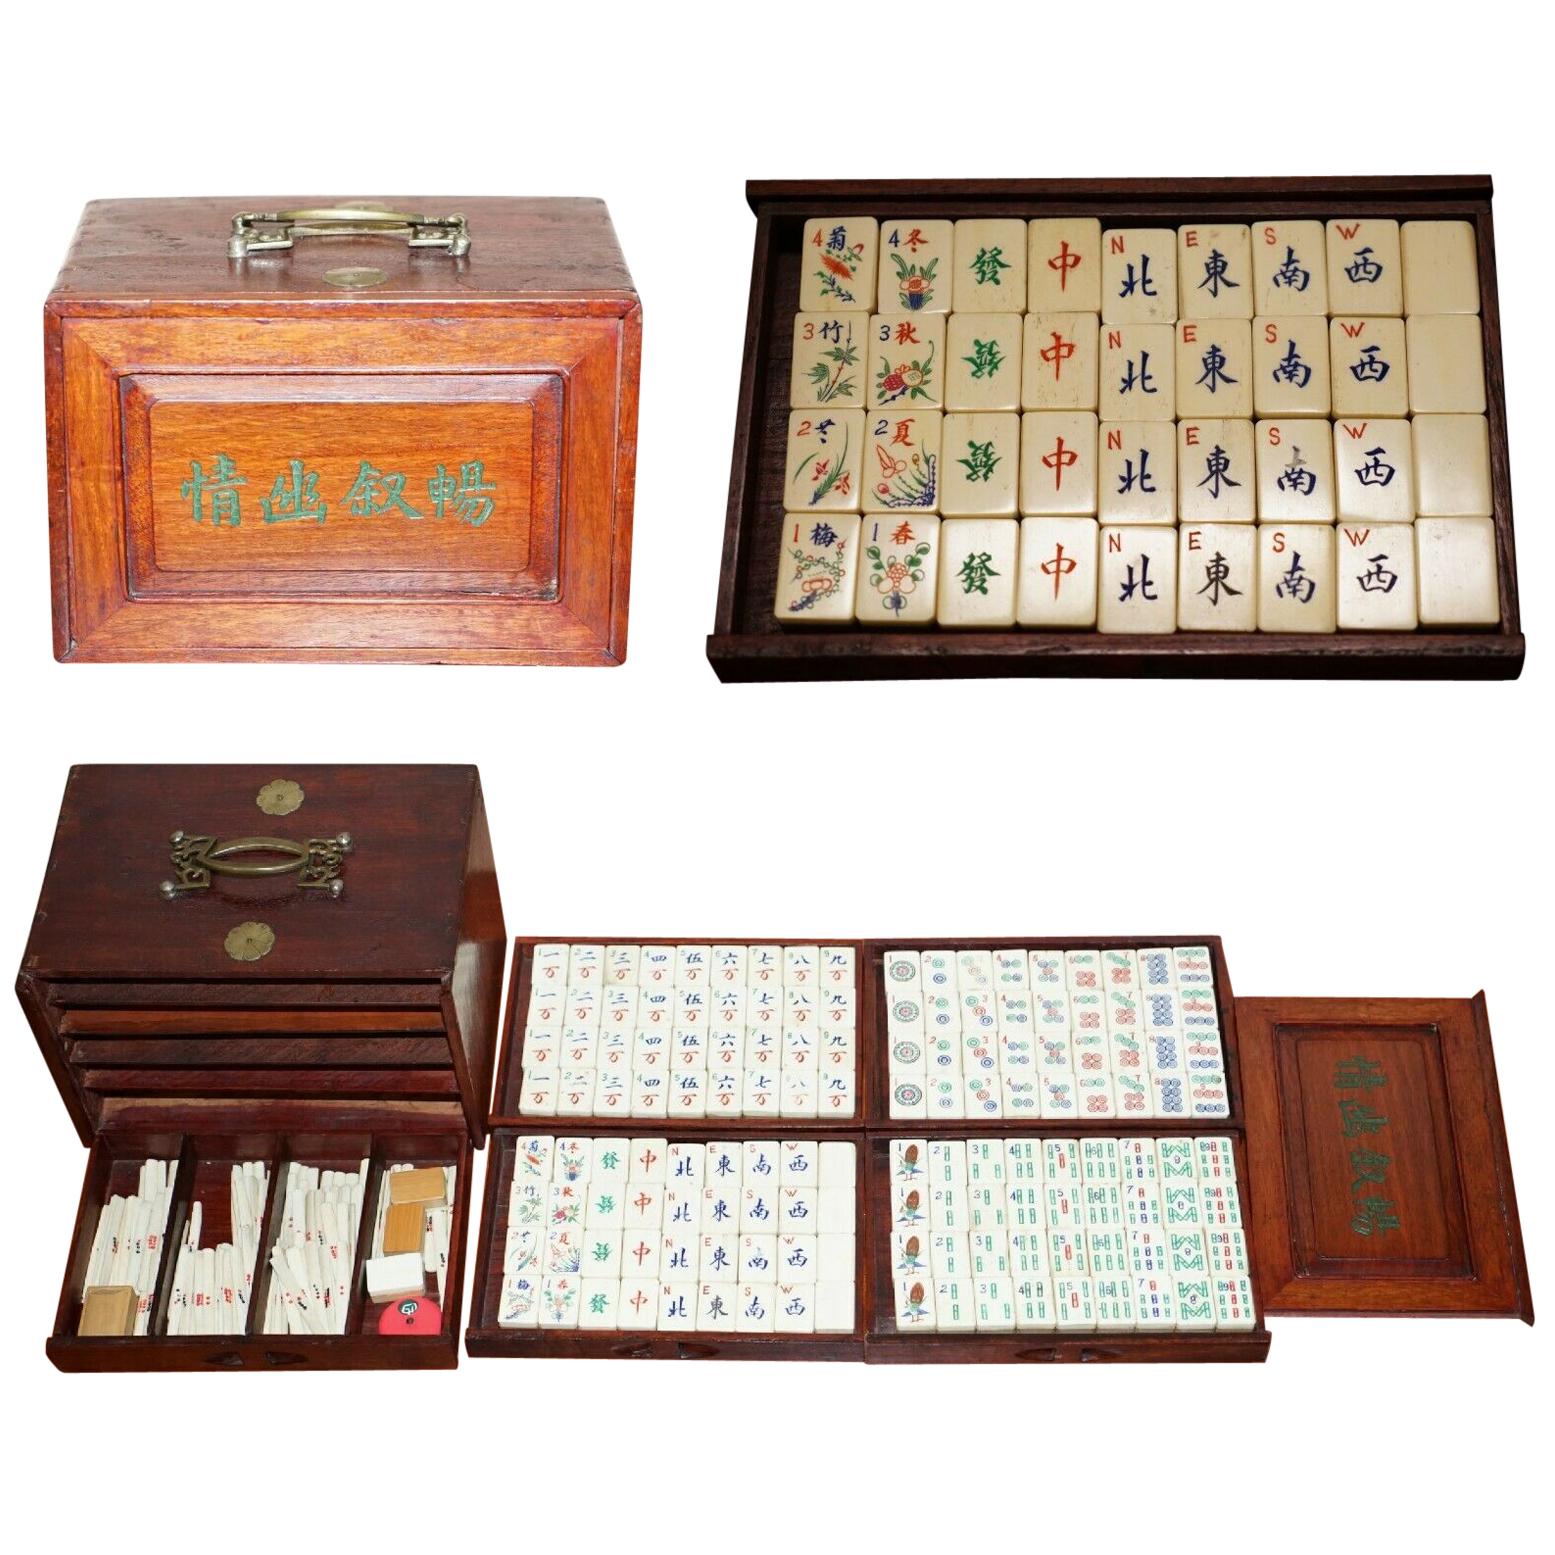 Mahjong Tiles are all the rage! Retro Chinese Charm & Noteworthy